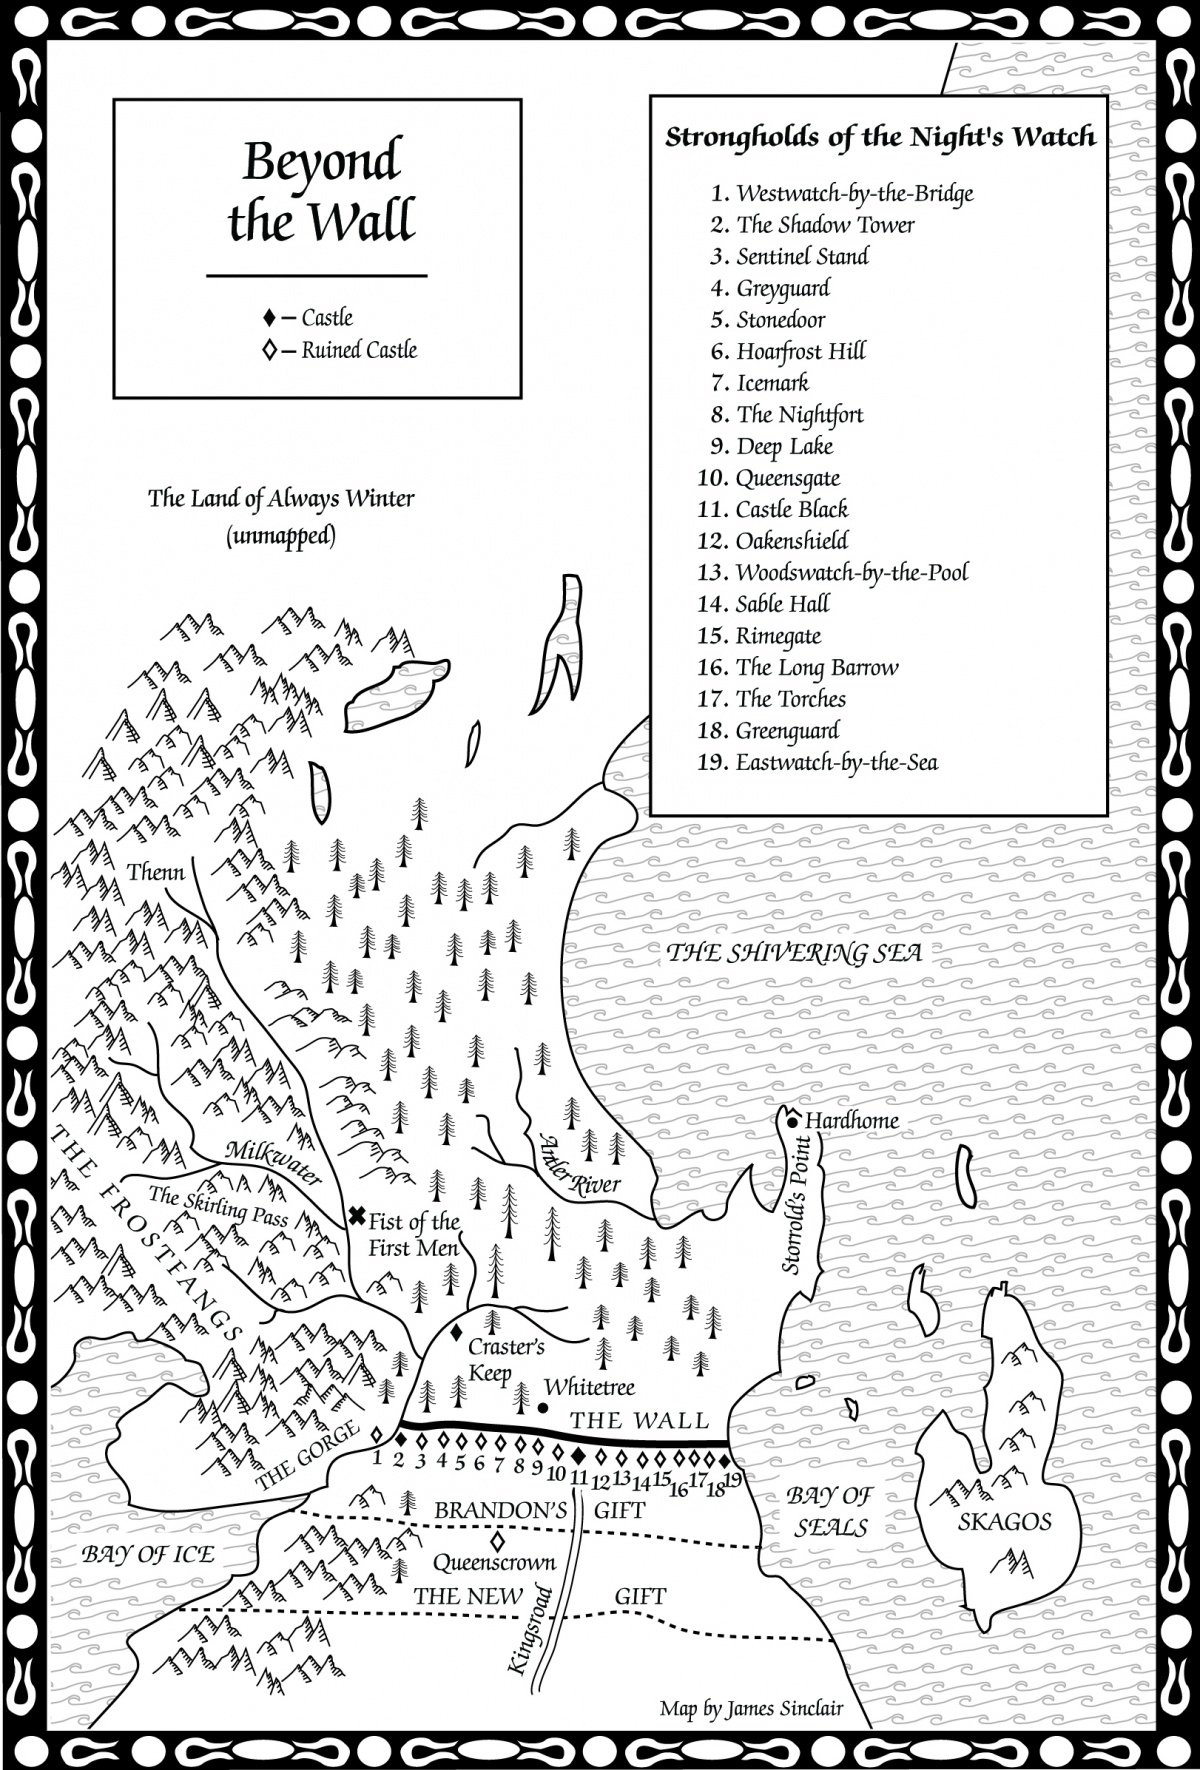 1200px-Beyond_the_wall_ASOS_map.jpg